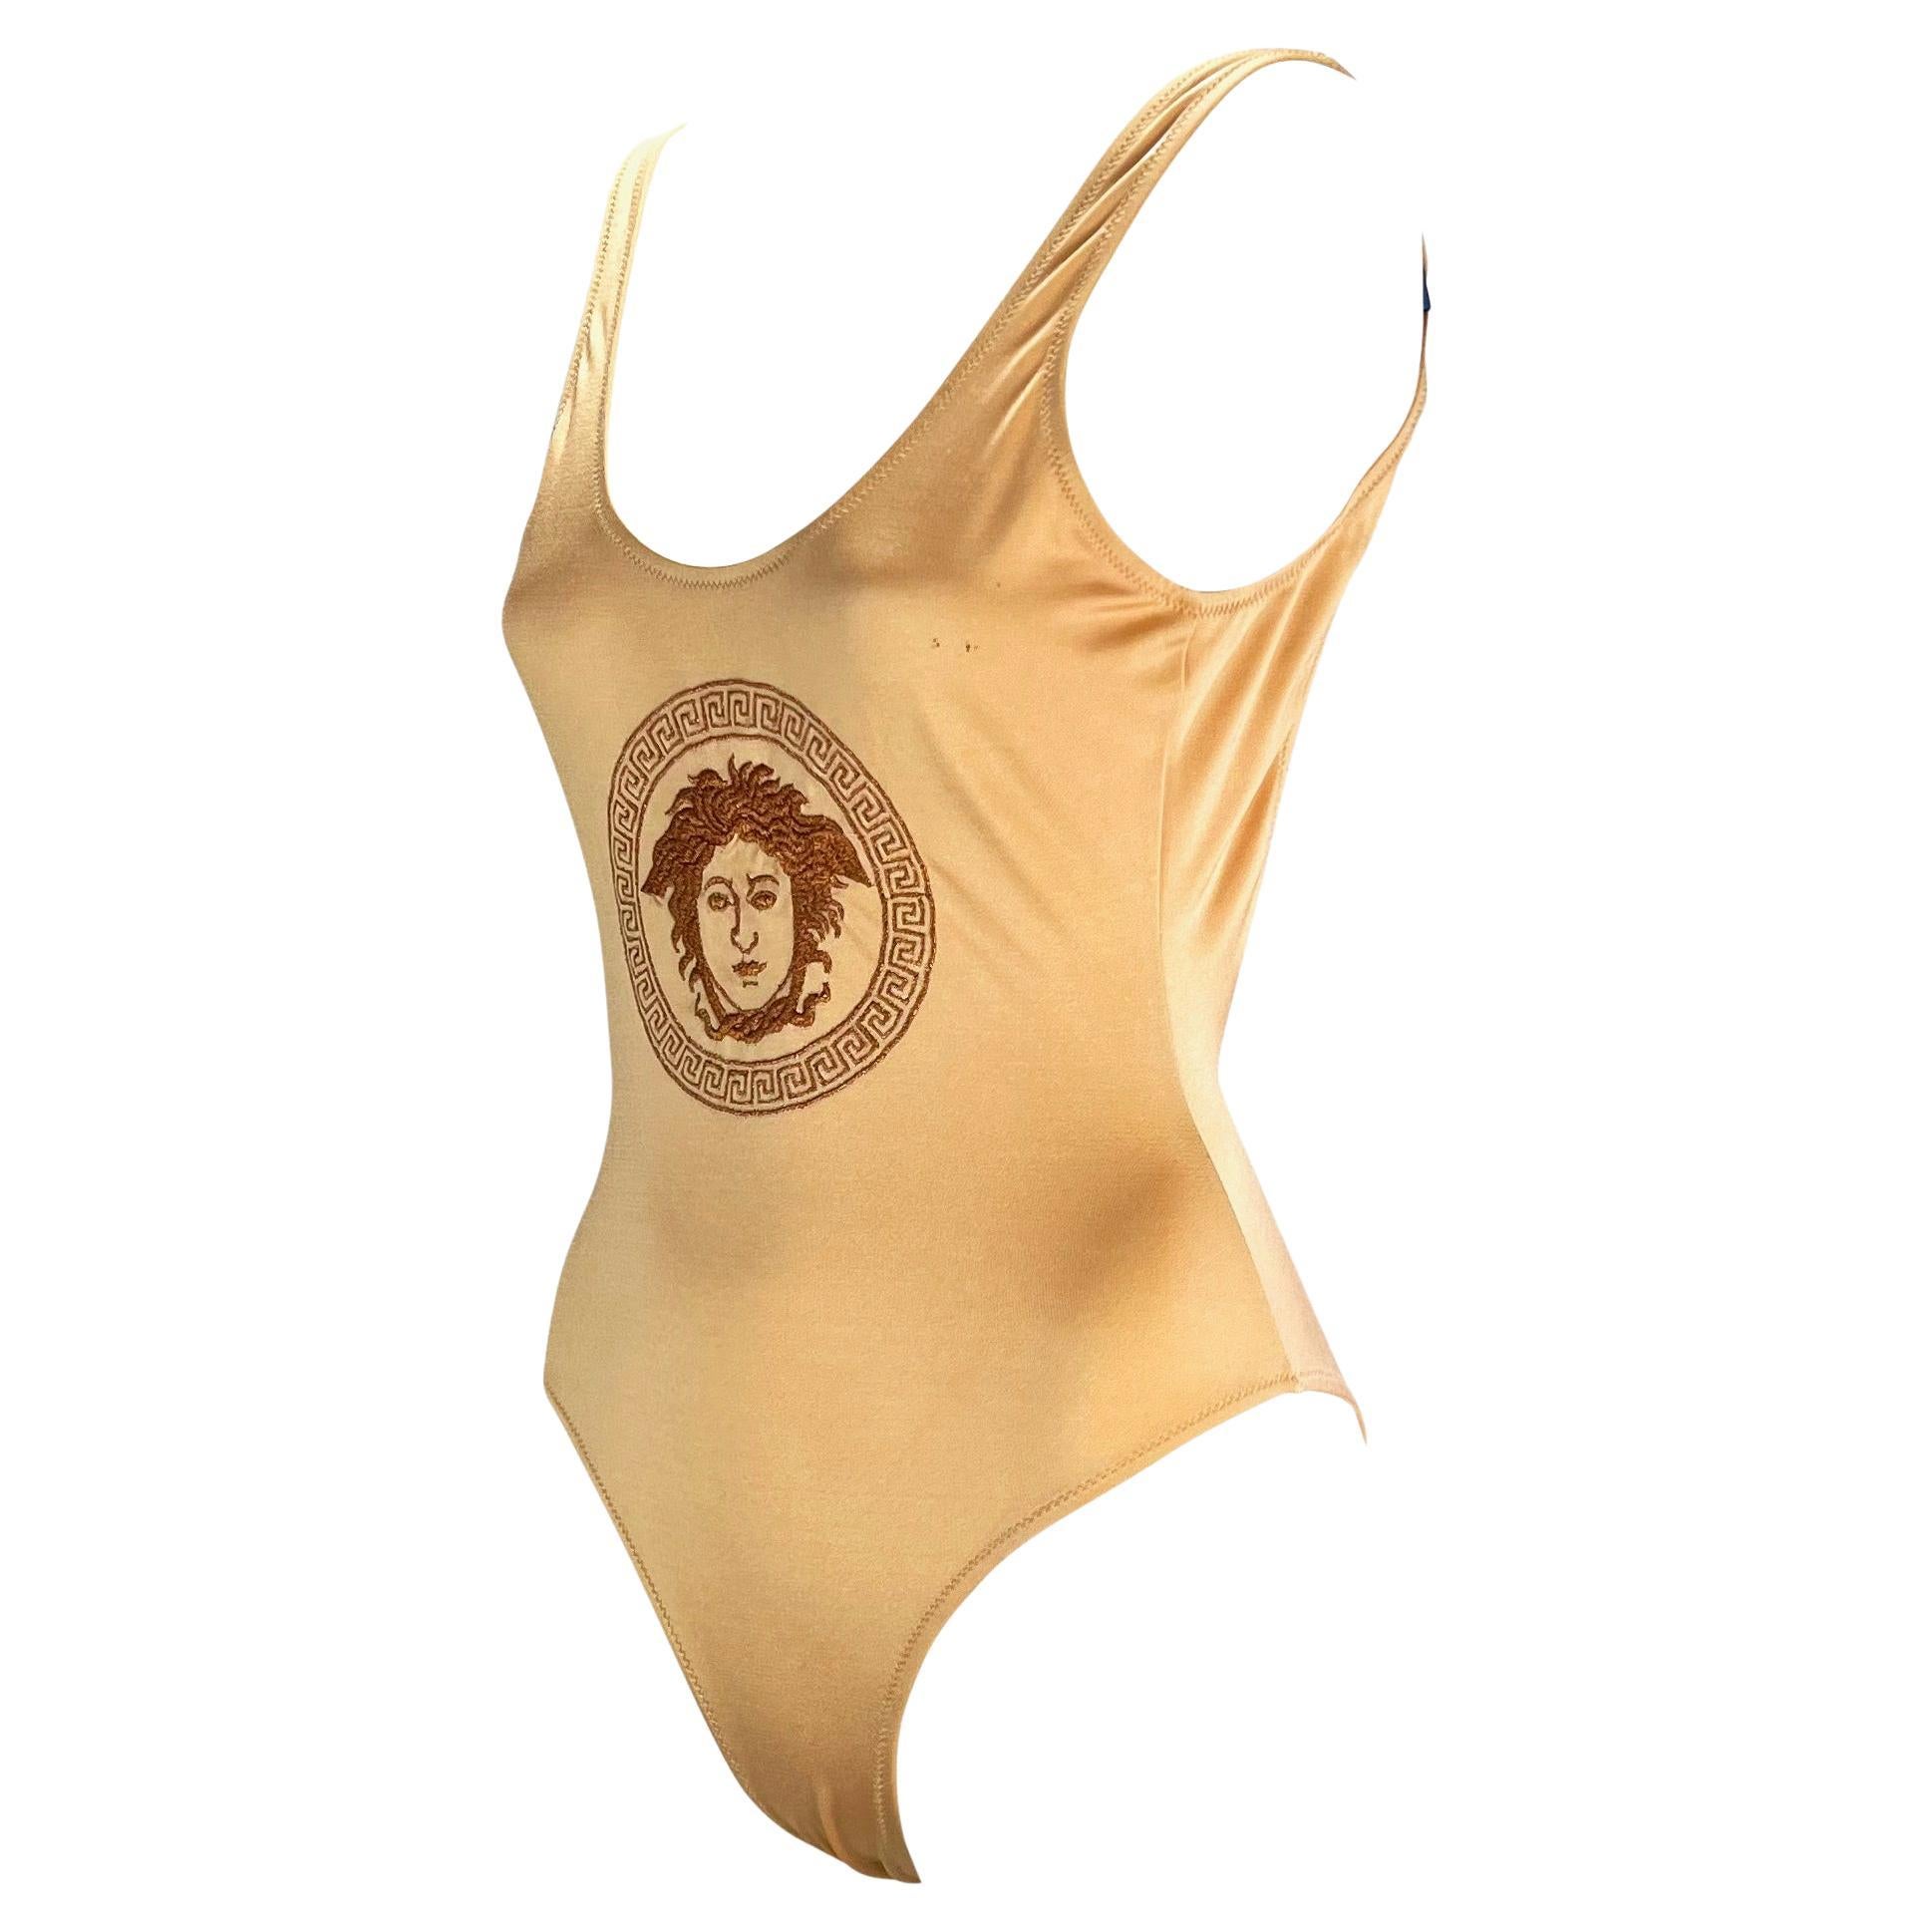 Presenting a beautiful beige Gianni Versace one piece bathing suit. From the 1990s, this shimmery beige swim suit proudly features an embroidered Versace Medusa with surrounding Greek key at the front center. The piece features a scoop neckline and